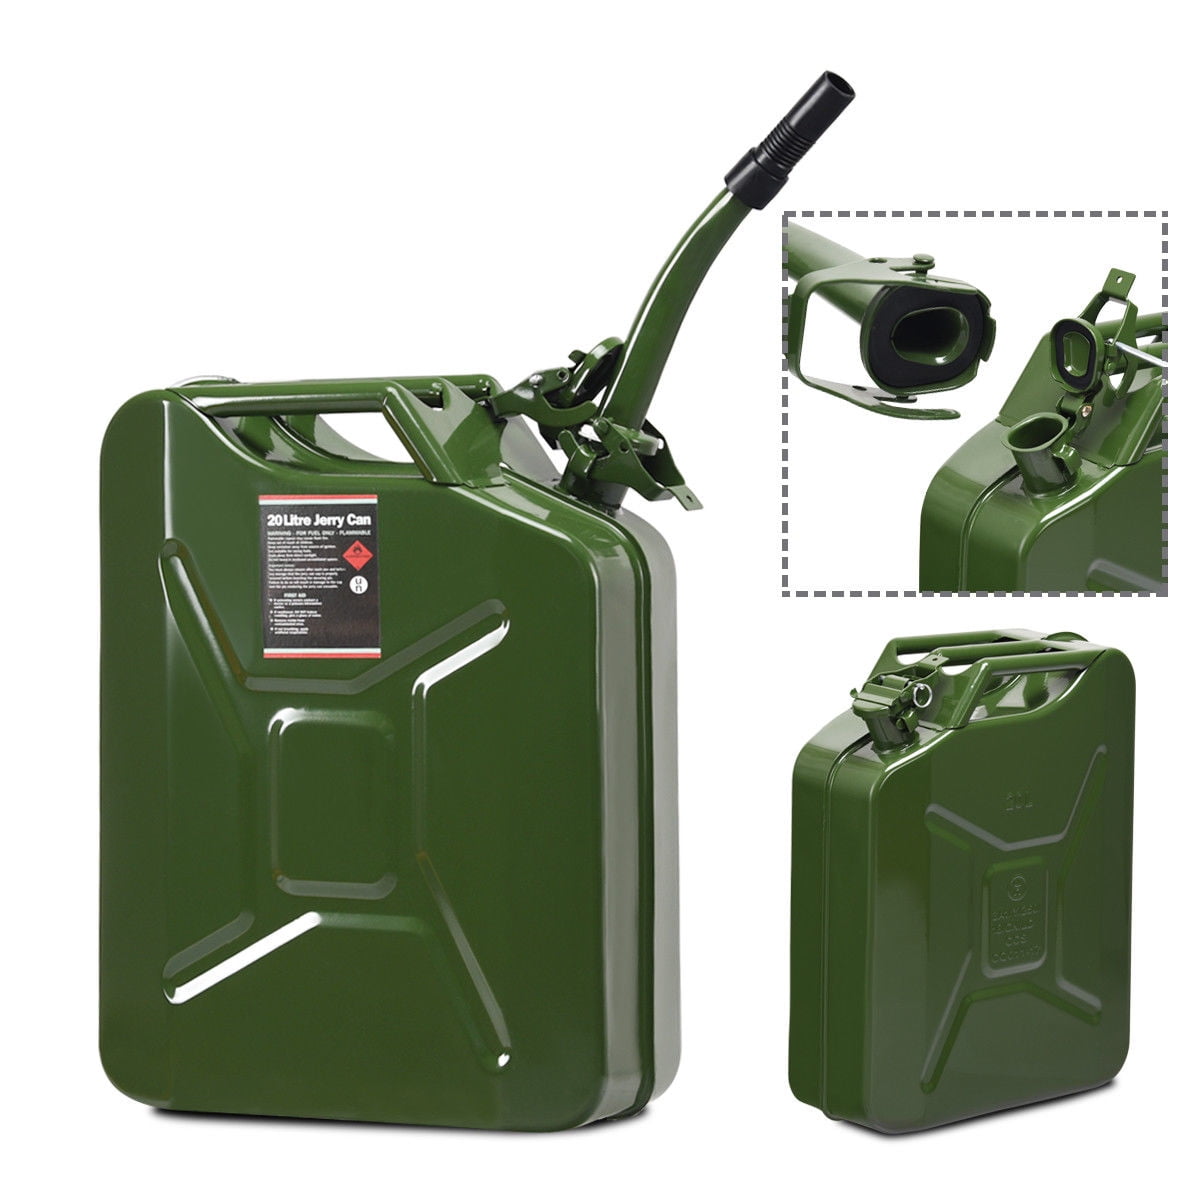 Jerry Can 5 Gal 20L NATO Style Gasoline Fuel Can Metal Gas Tank Emergency Backup 